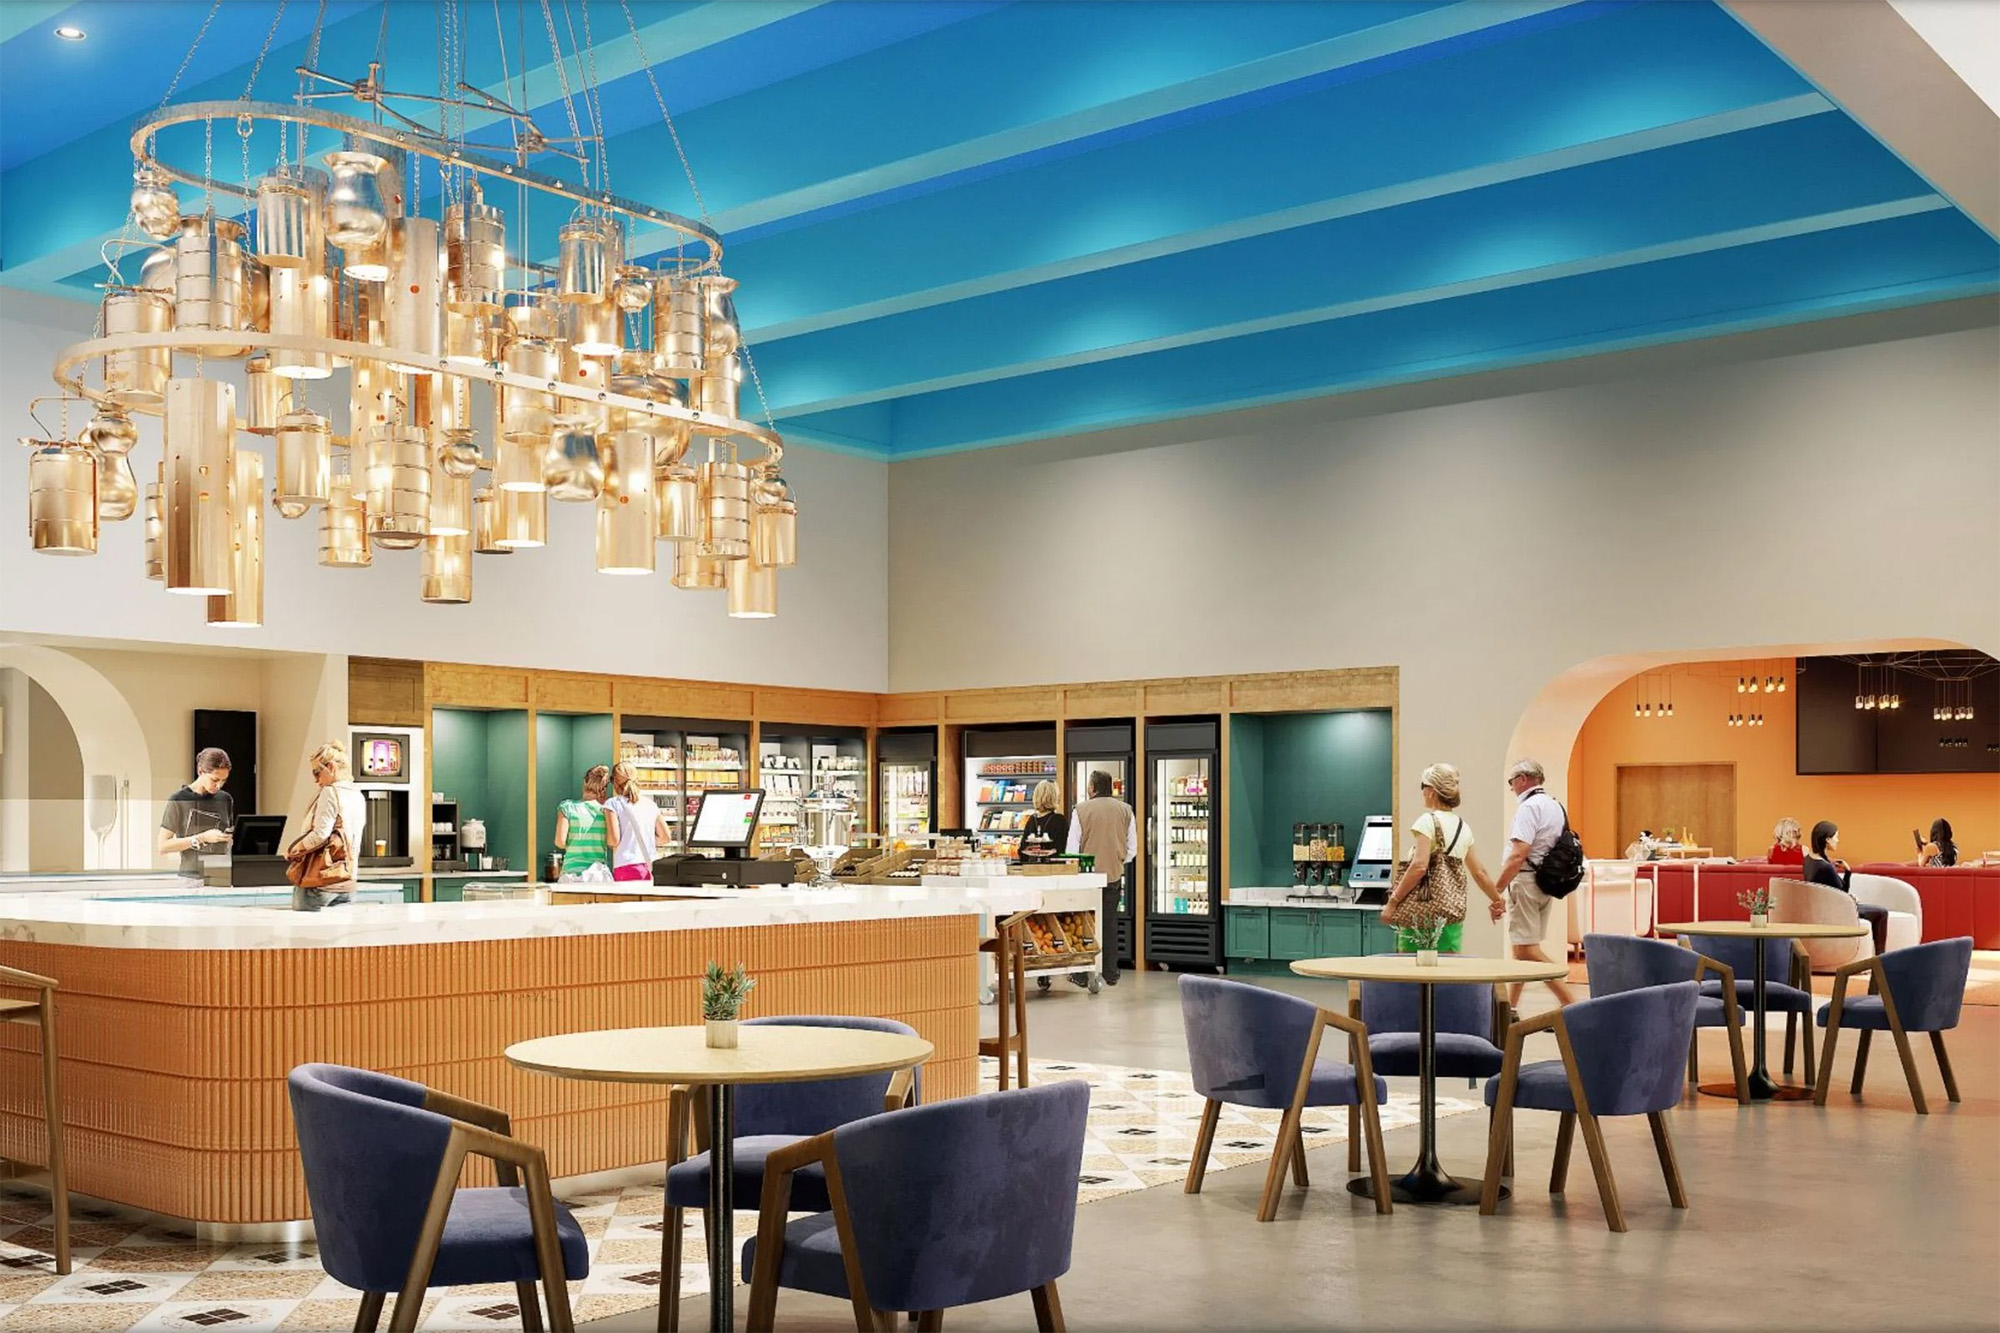 A rendering of the chai bar and Masti lounge at Priya Living in Rochester Hills, MI